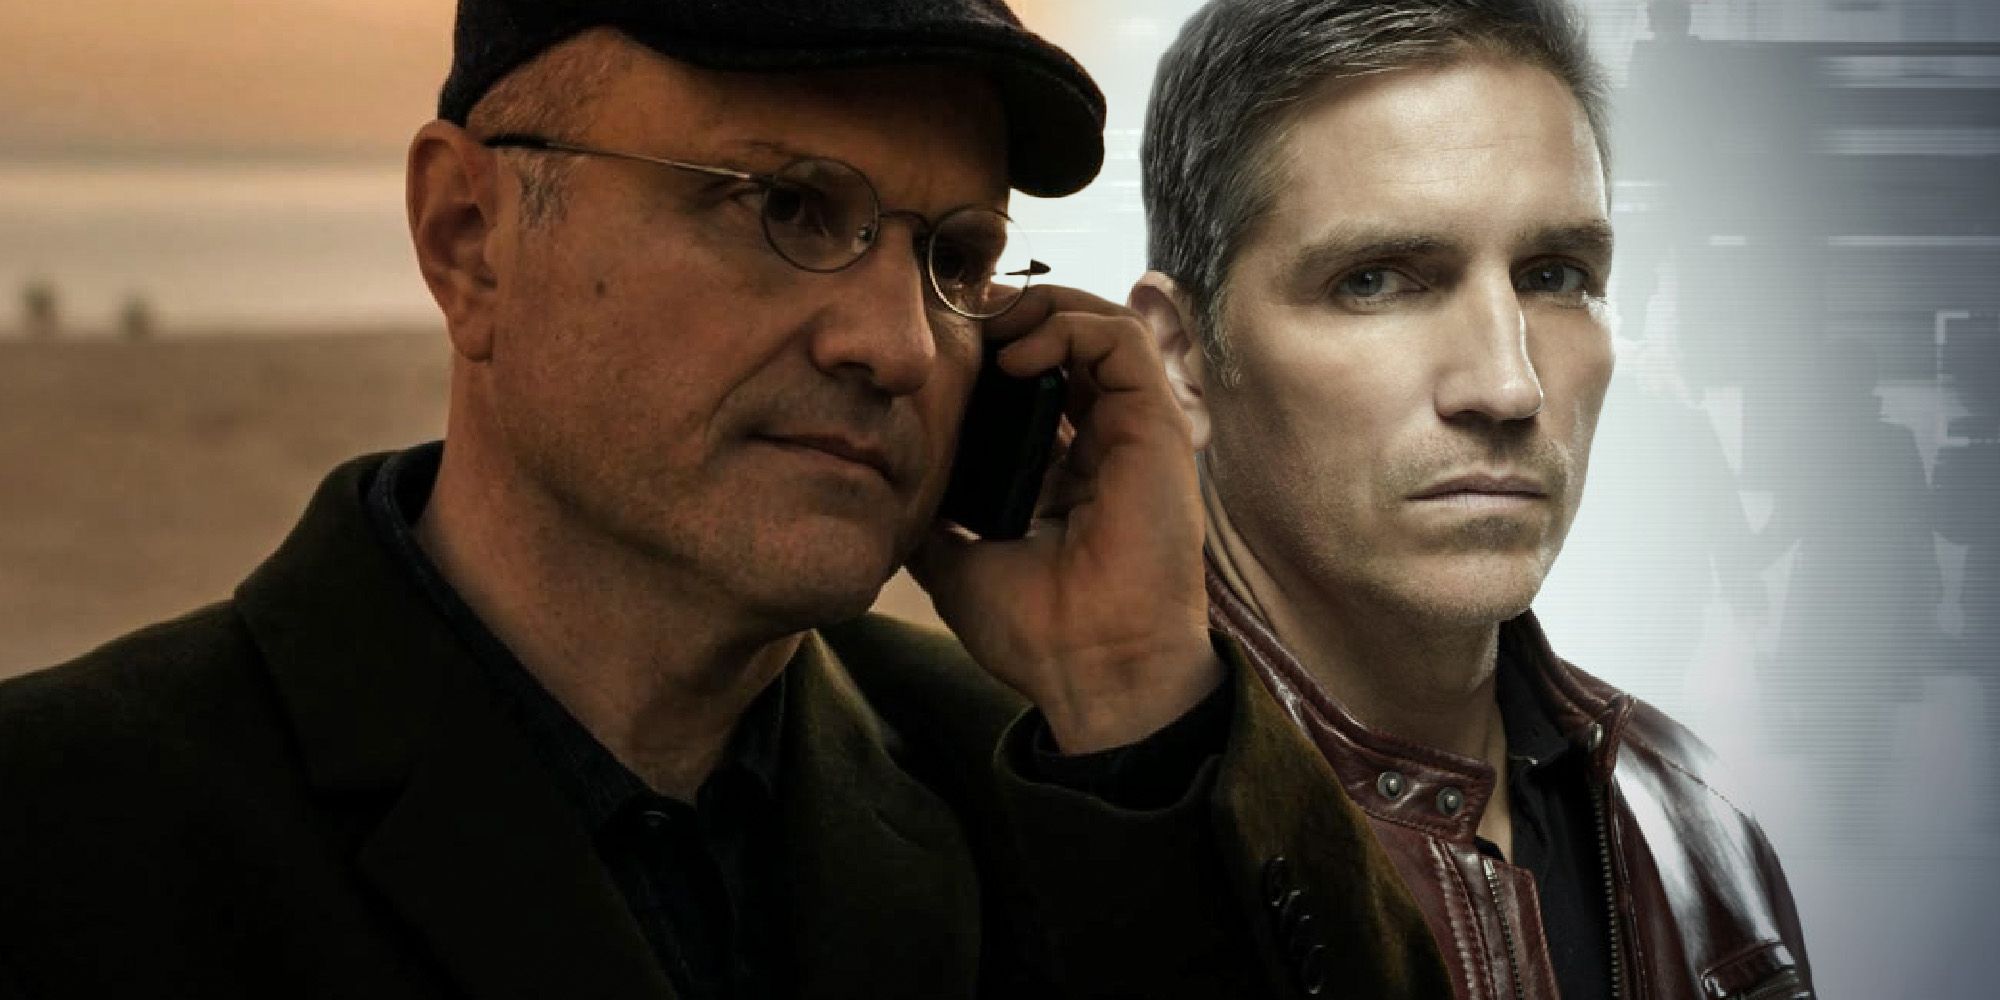 Elias The person of interest